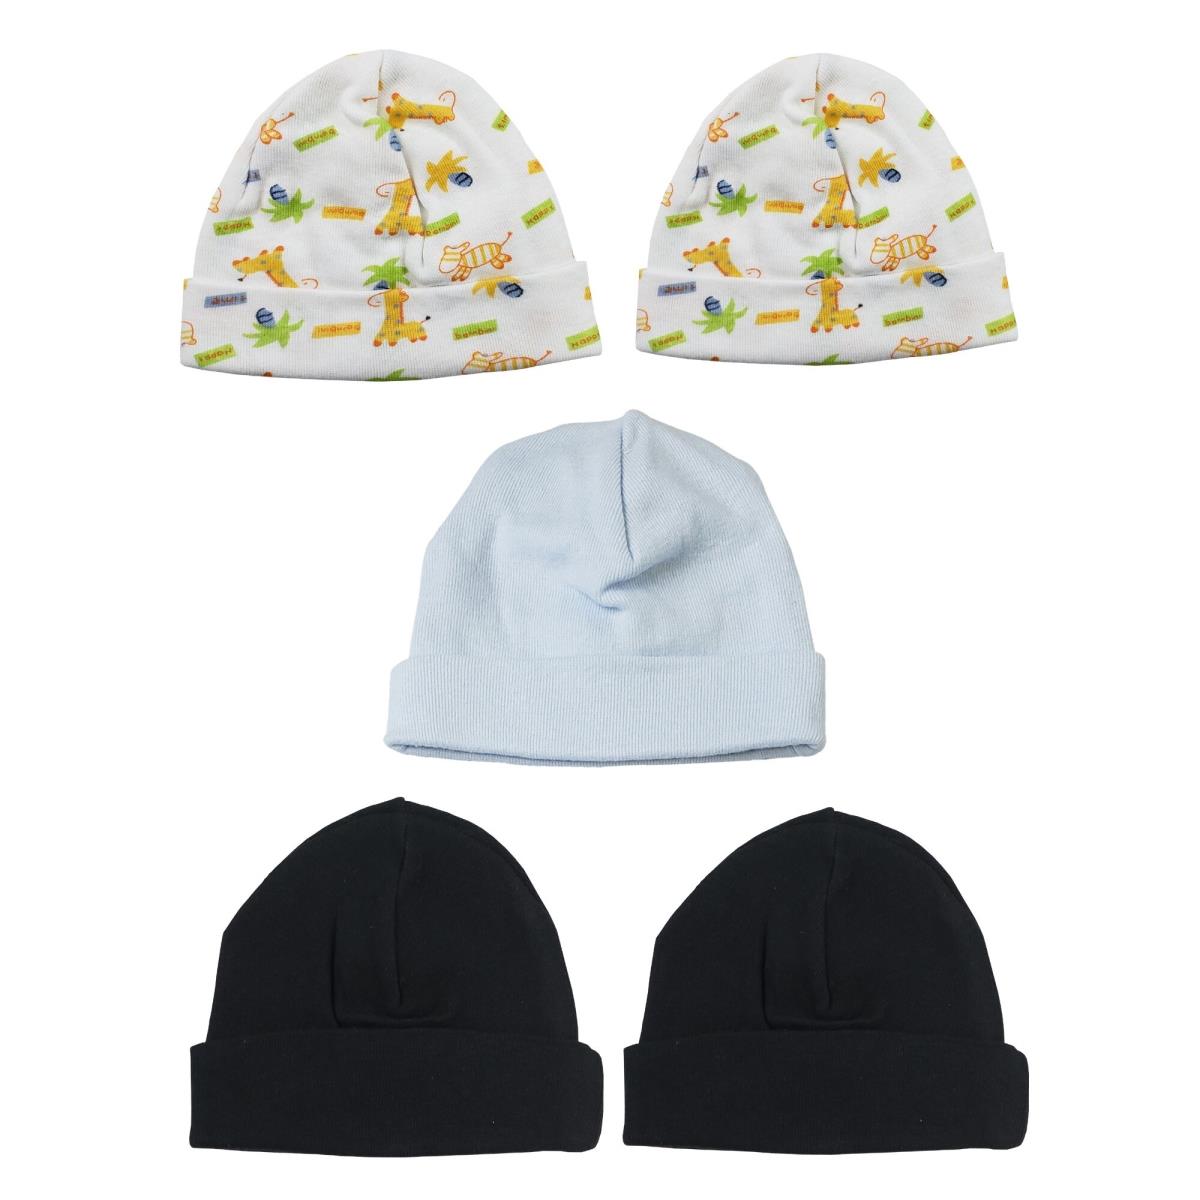 Picture of Bambini LS-0473 Boys Baby Caps - Blue&#44; Black & Print - One Size - 5 per Pack